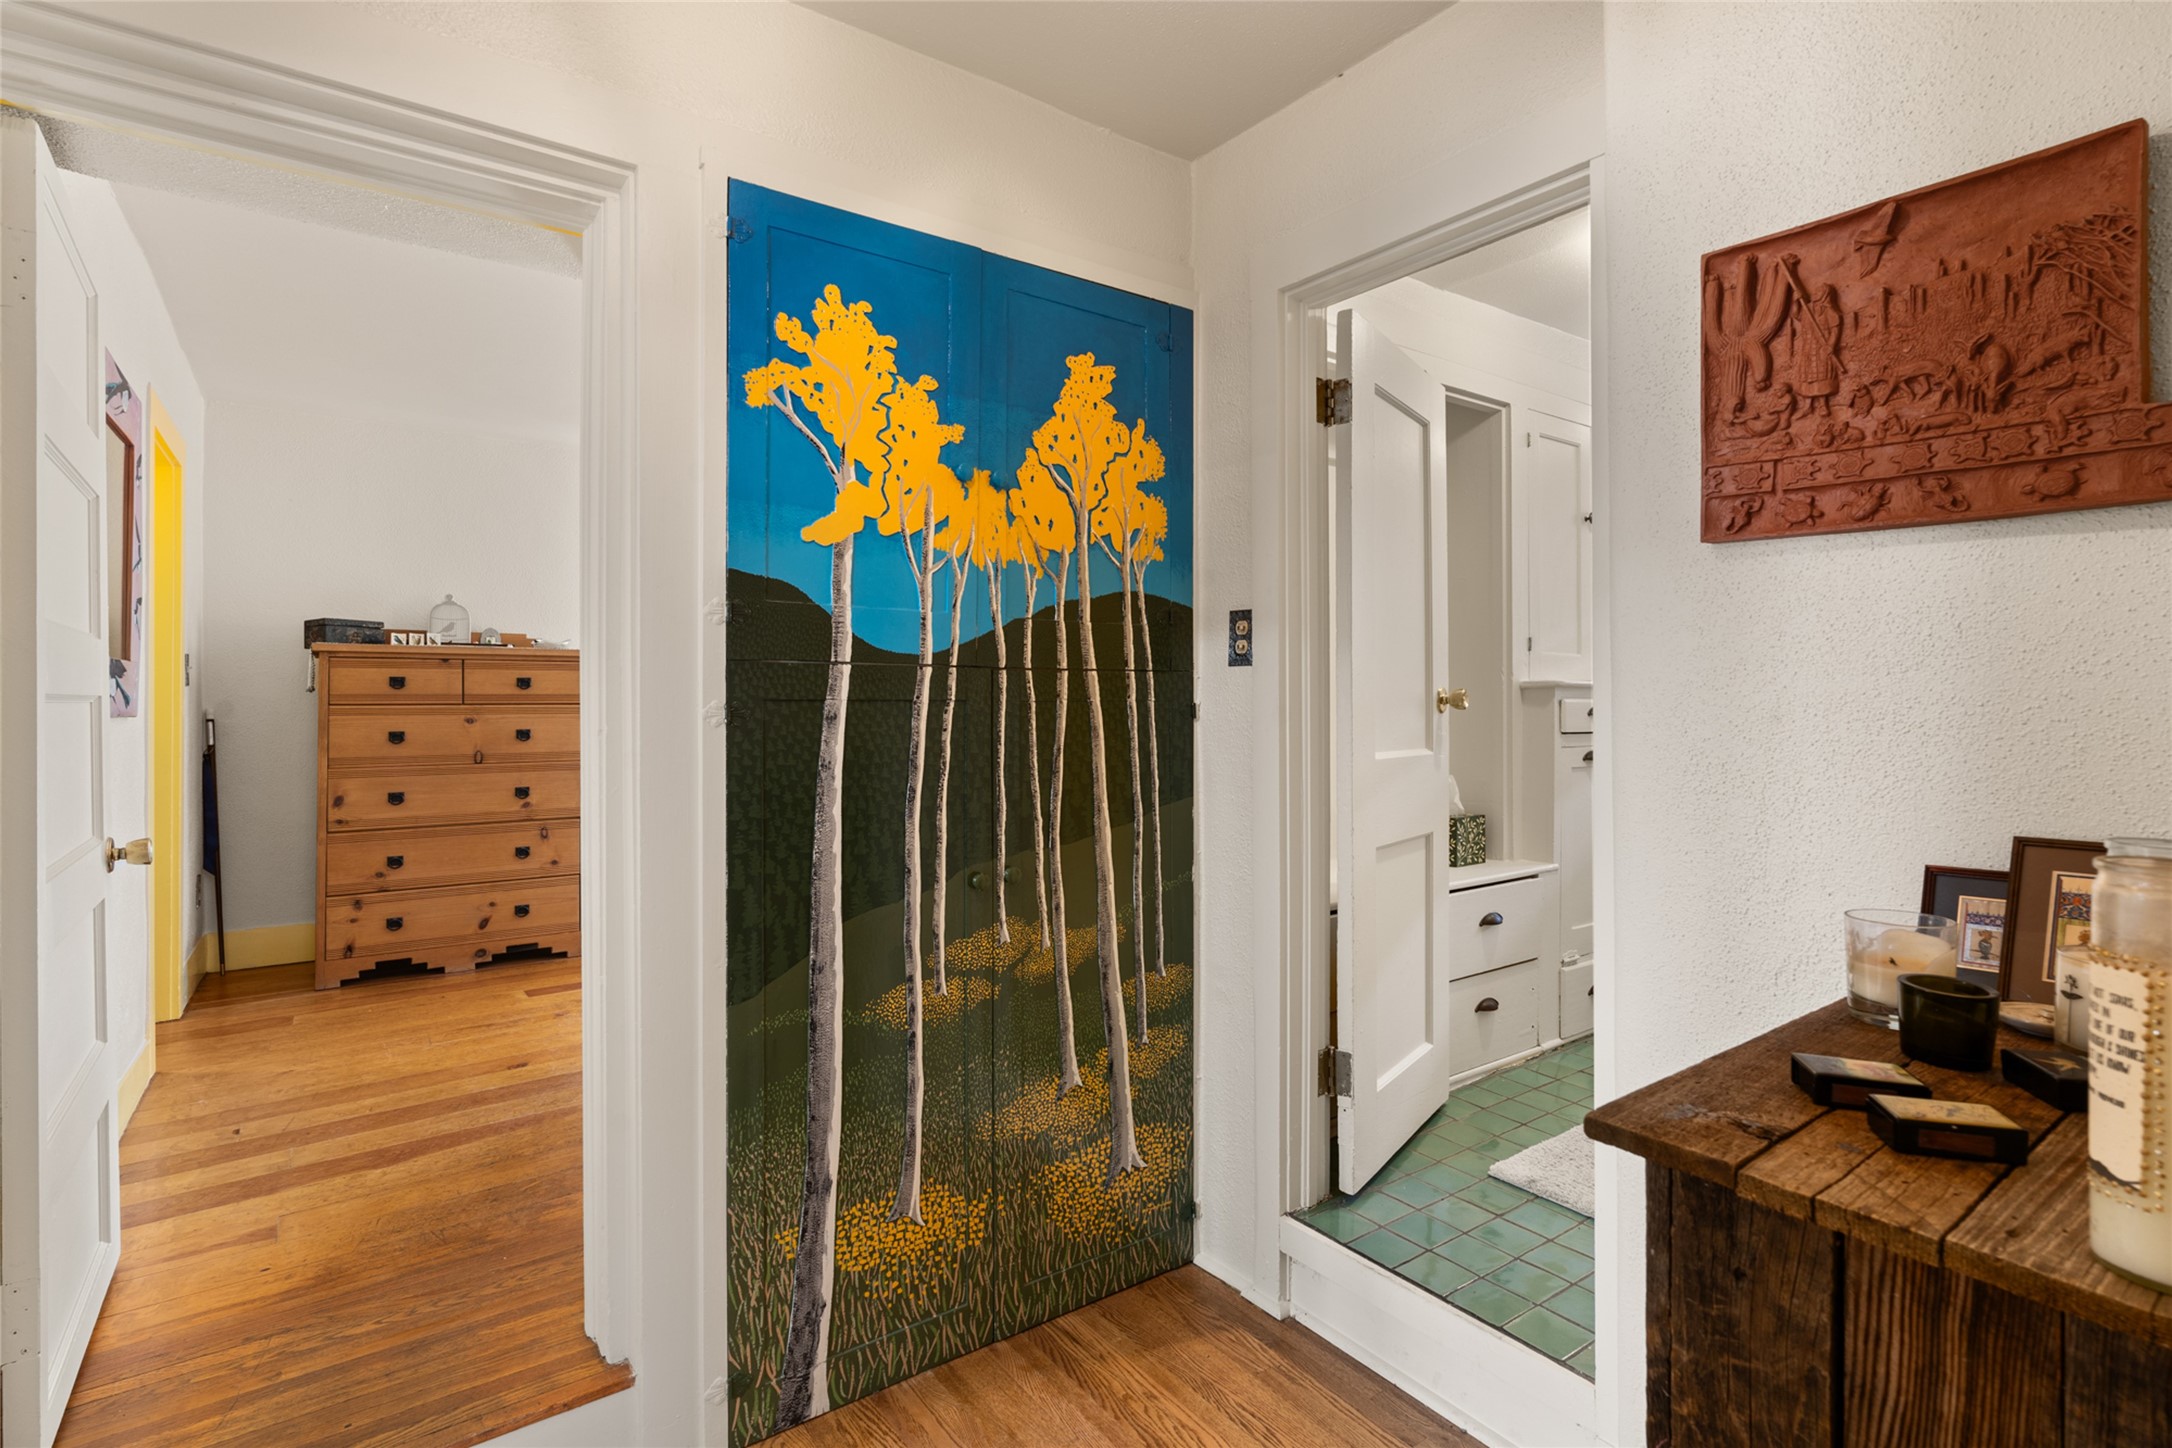 Hallway to Bedroom & Bath (Hand Painted/Carved Cabinetry)